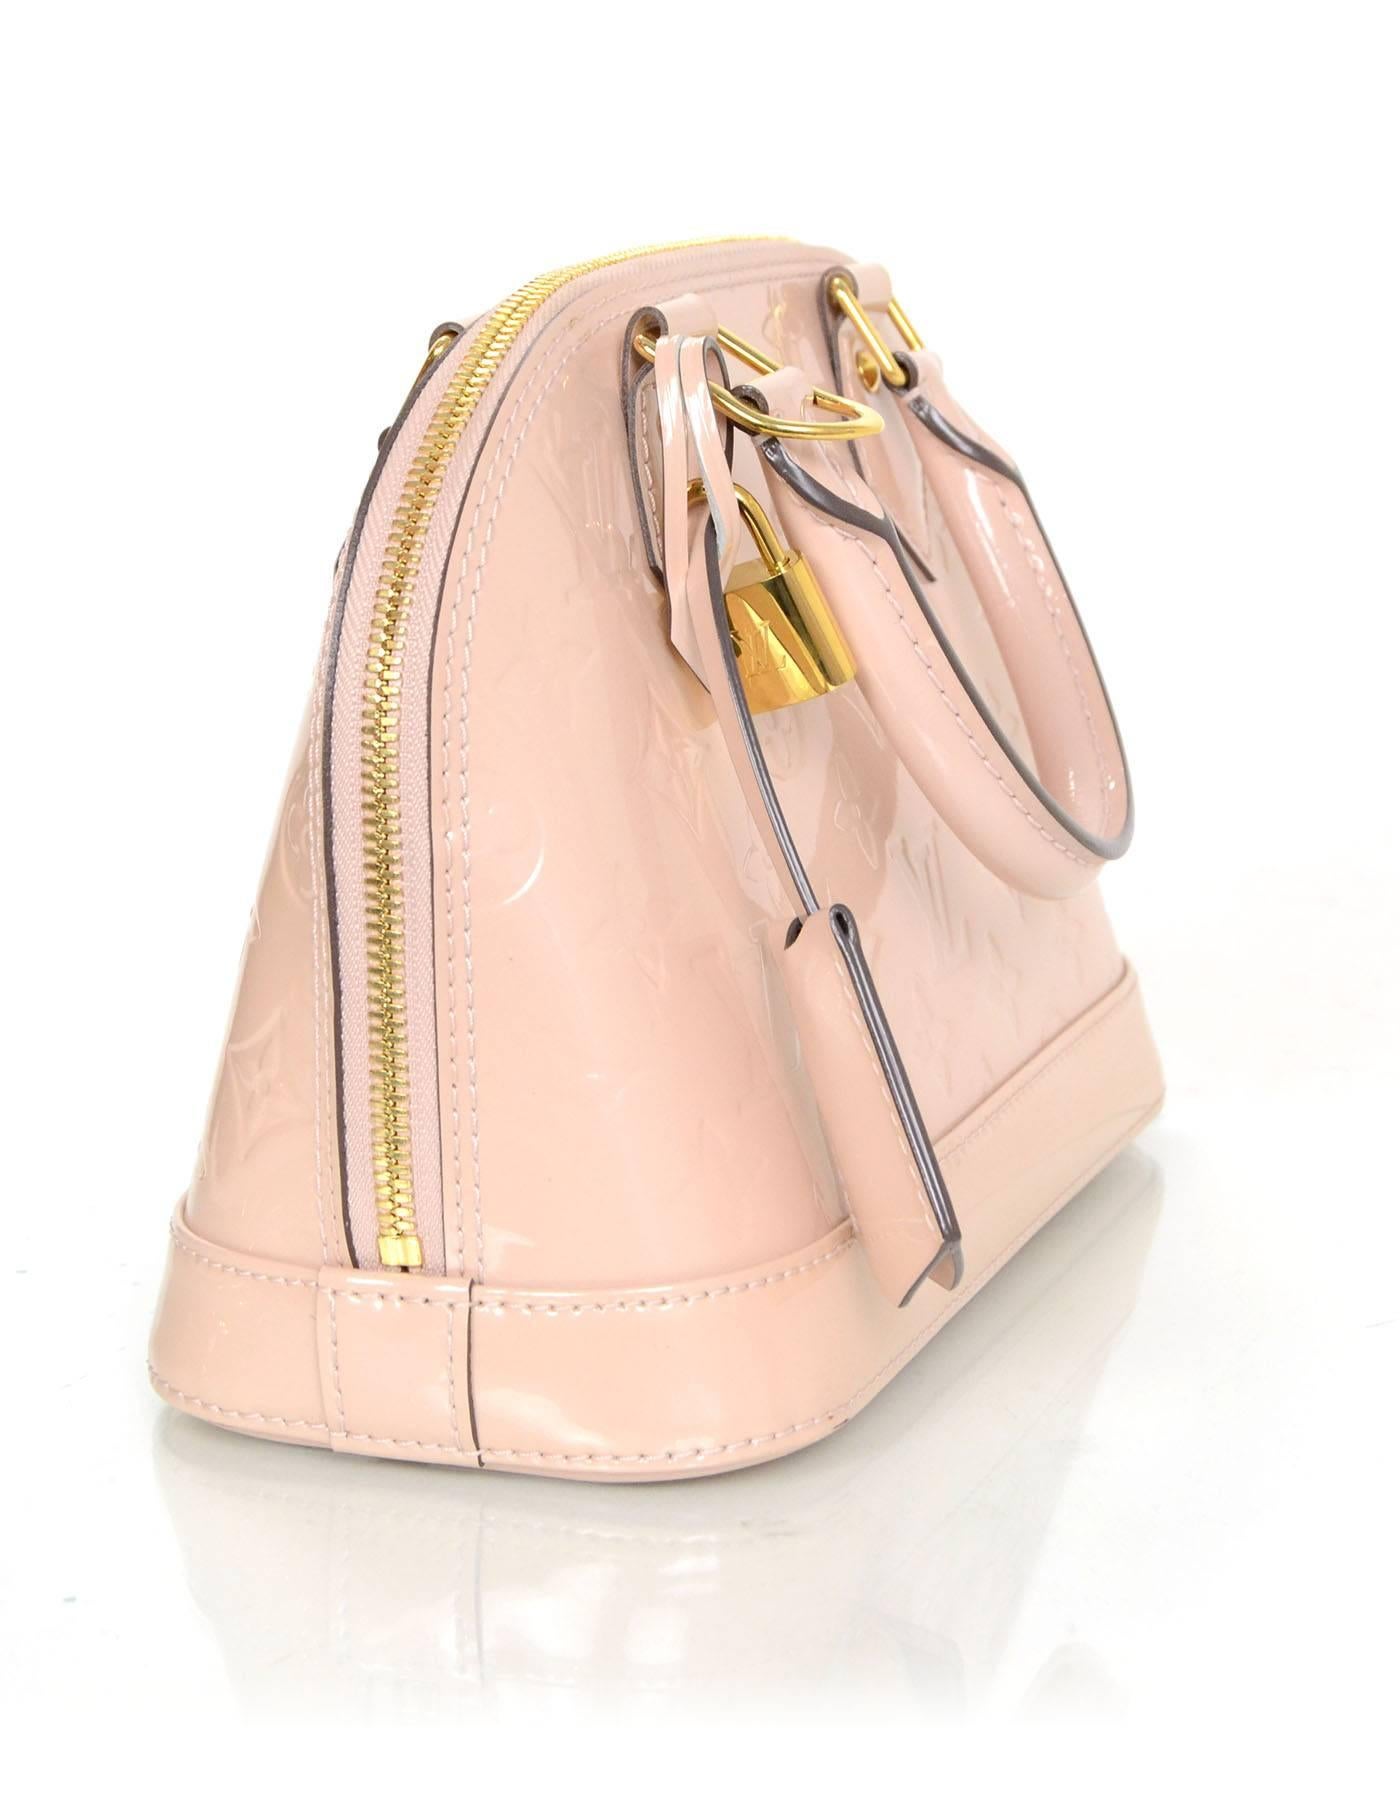 Louis Vuitton Nude Monogram Vernis Alma BB
Features optional shoulder/crossbody strap
Made In: France
Year of Production: 2013
Color: Nude
Hardware: Goldtone
Materials: Vernis leather (patent leather)
Lining: Nude canvas
Closure/Opening: